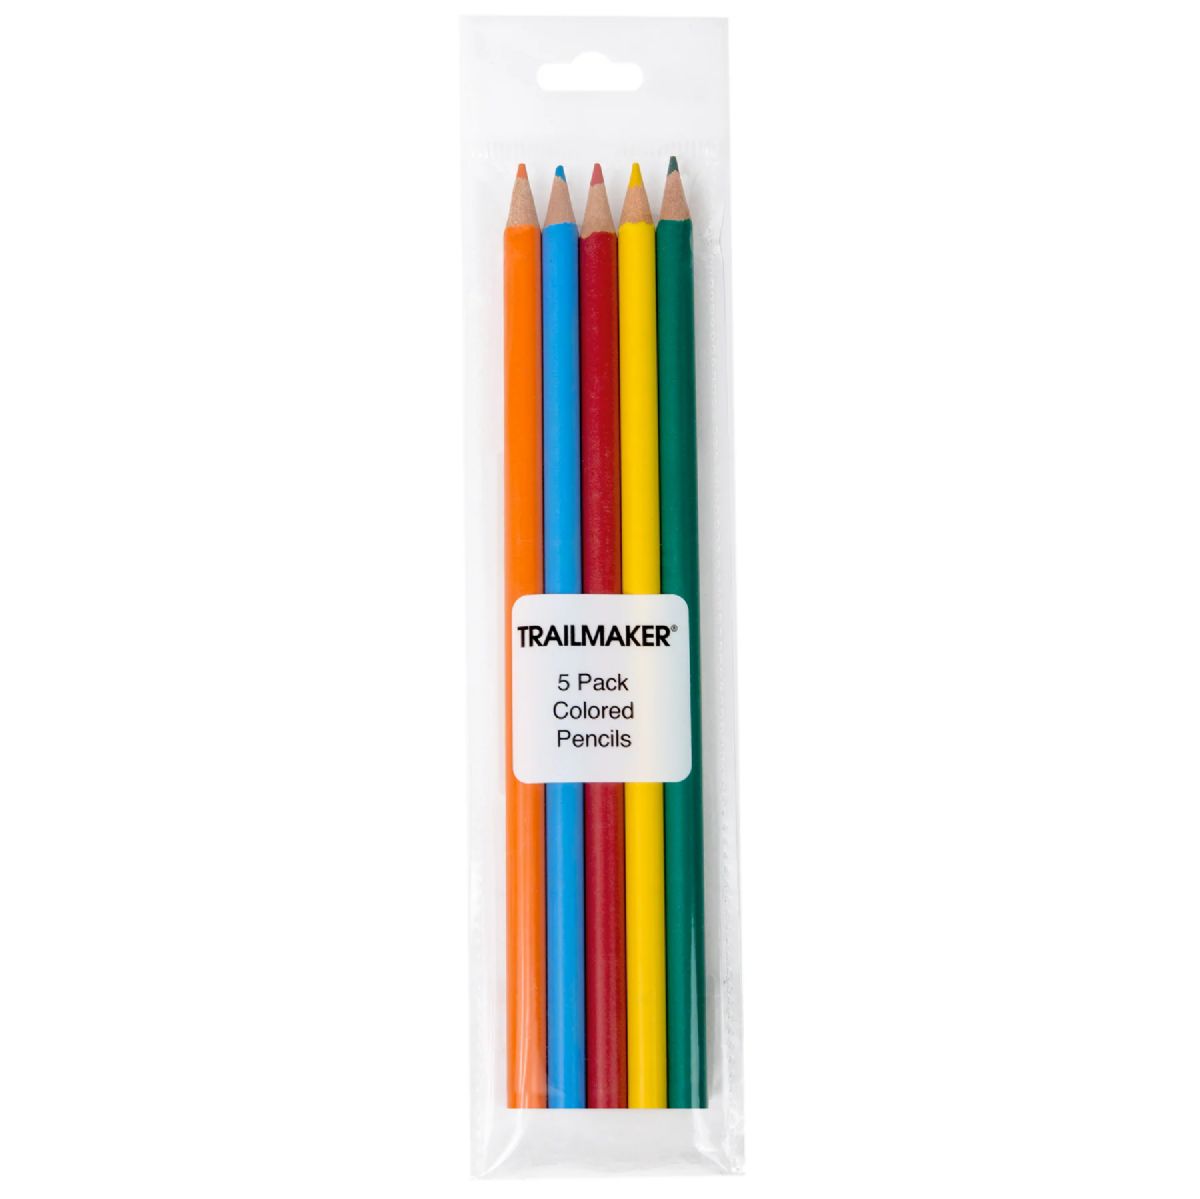 100 Wholesale 5 Pack Of Colored Pencils - 100 Pack - at 